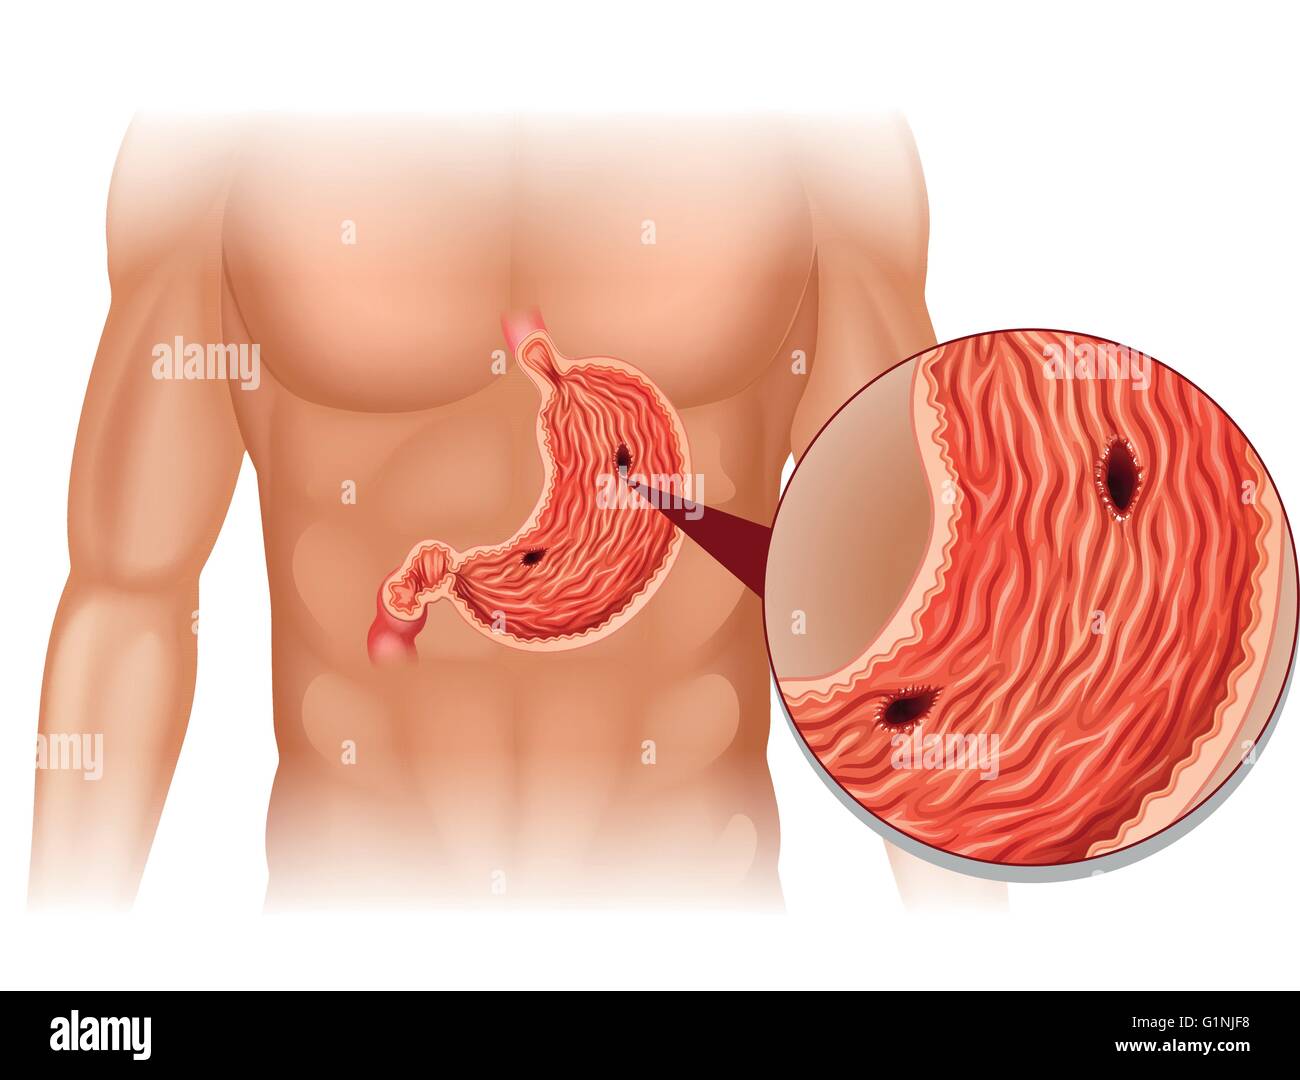 Stomach Ulcer in human body illustration Stock Vector